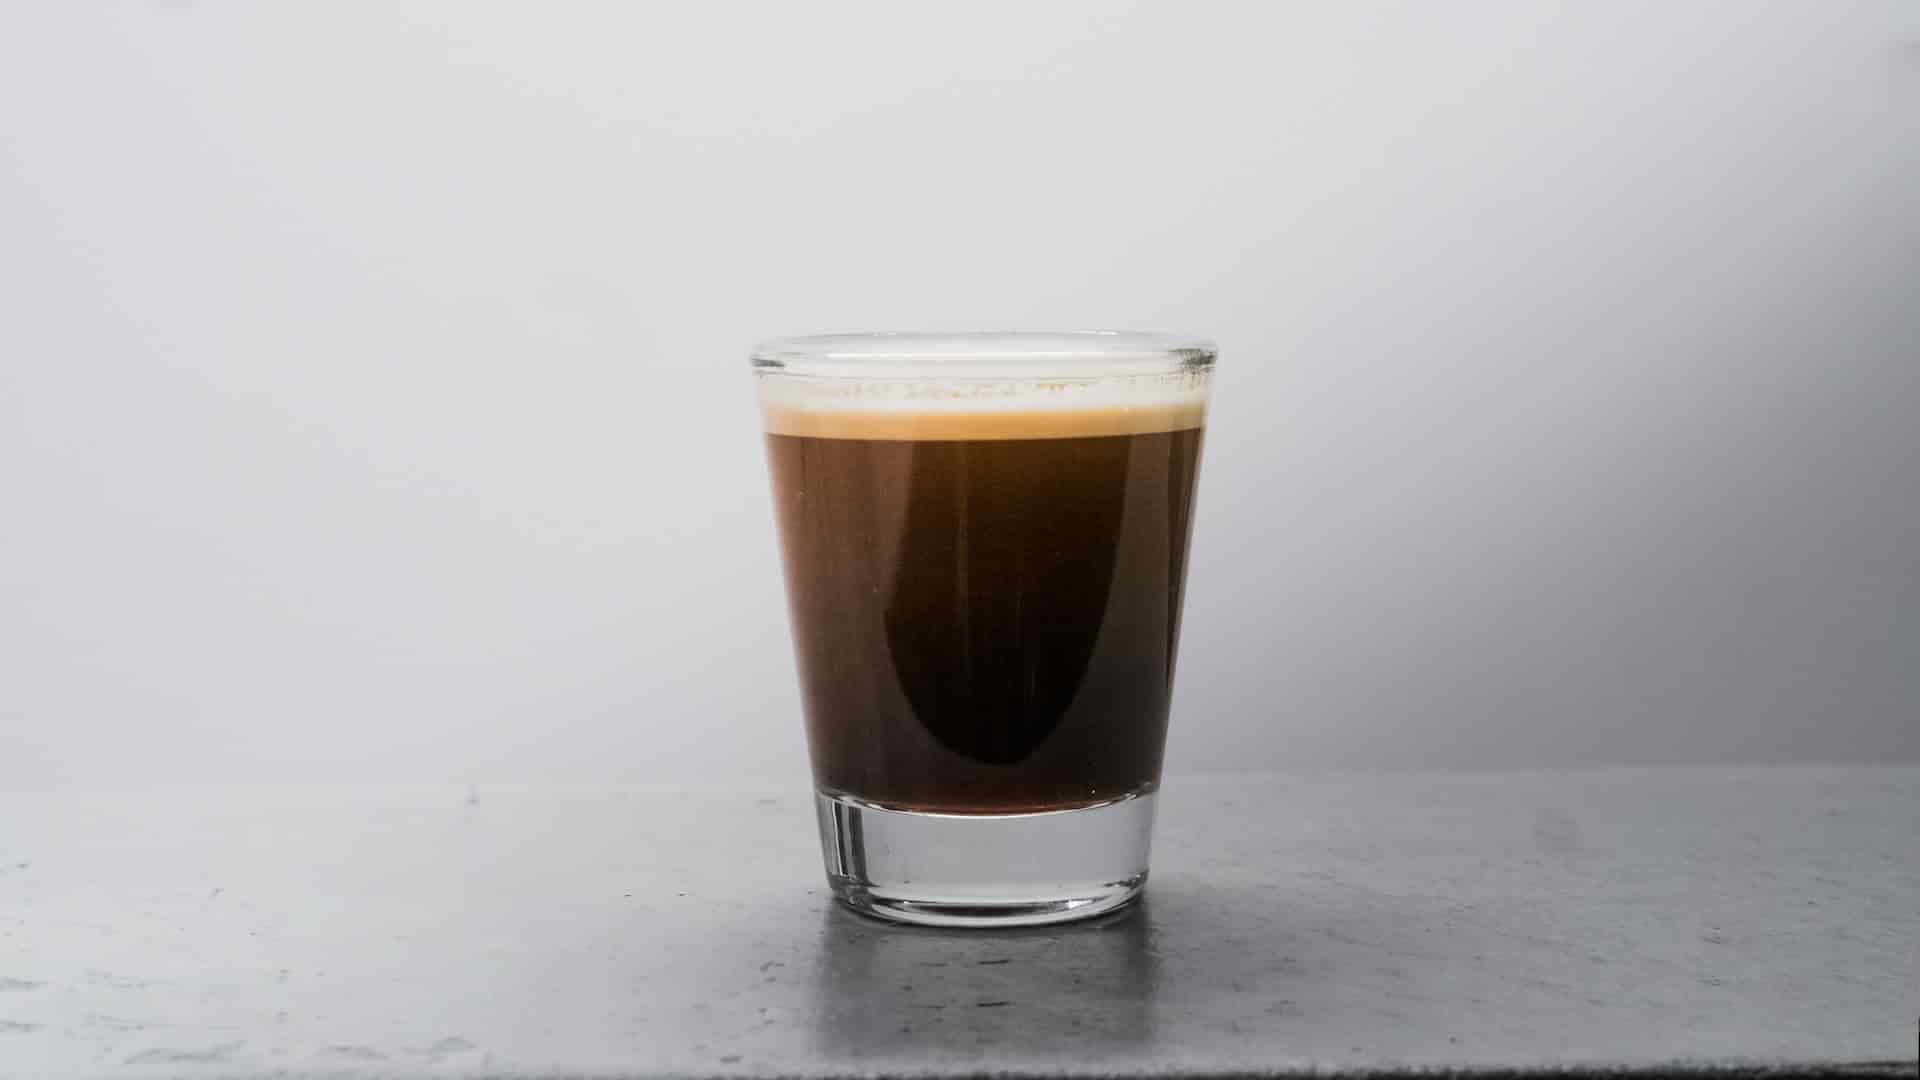 How Many Ounces Is An Espresso Shot? Question Answered